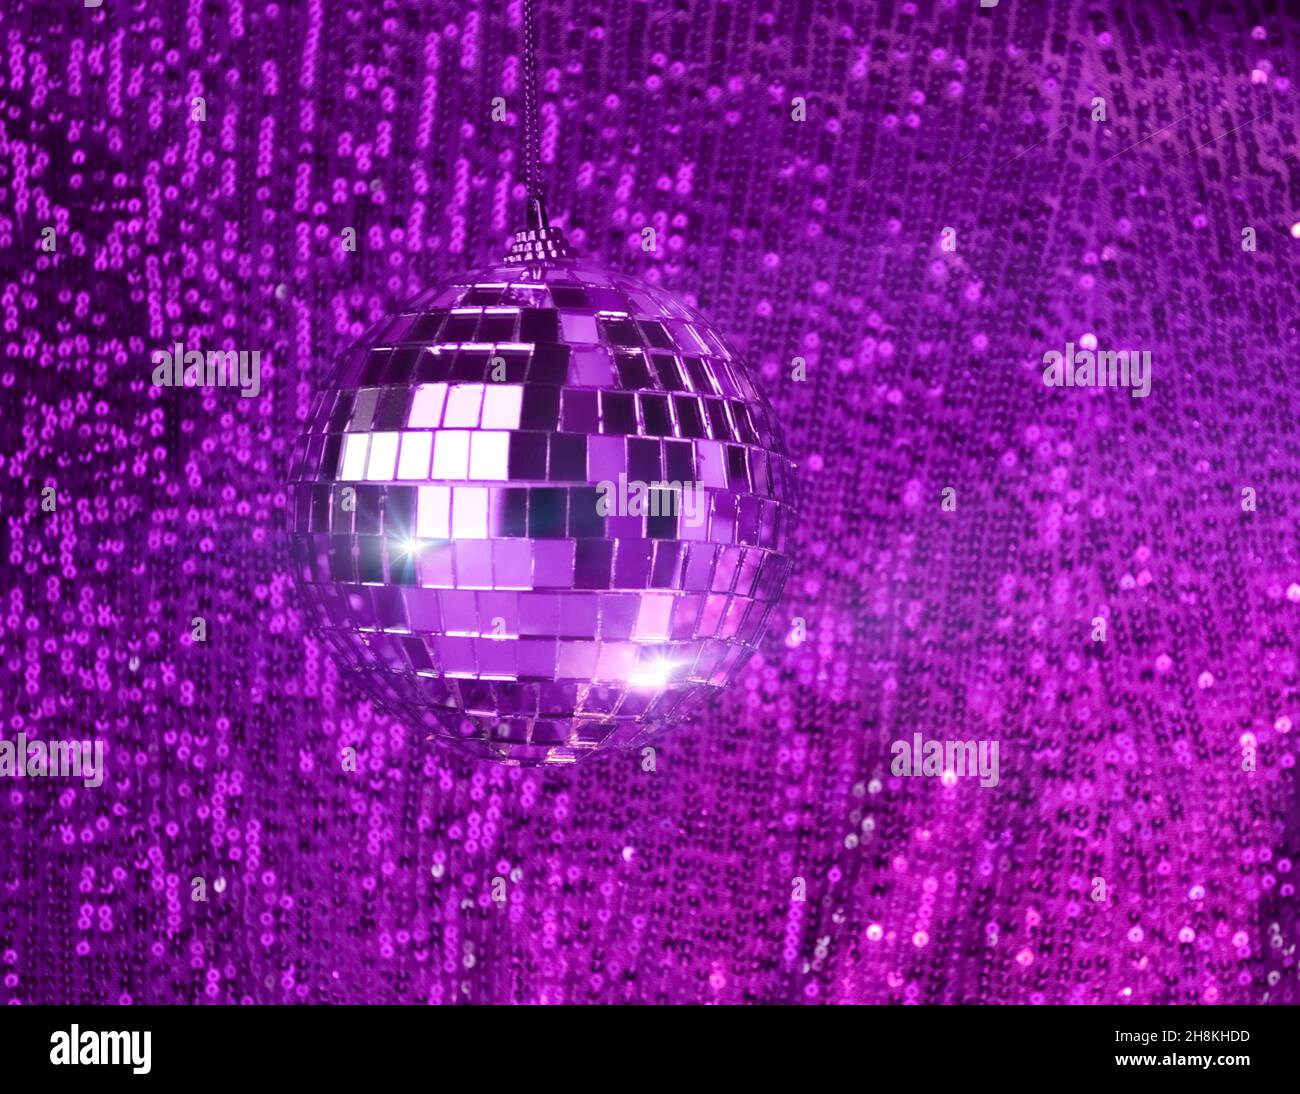 disco balls for decorationof a party on pink background Stock Photo - Alamy